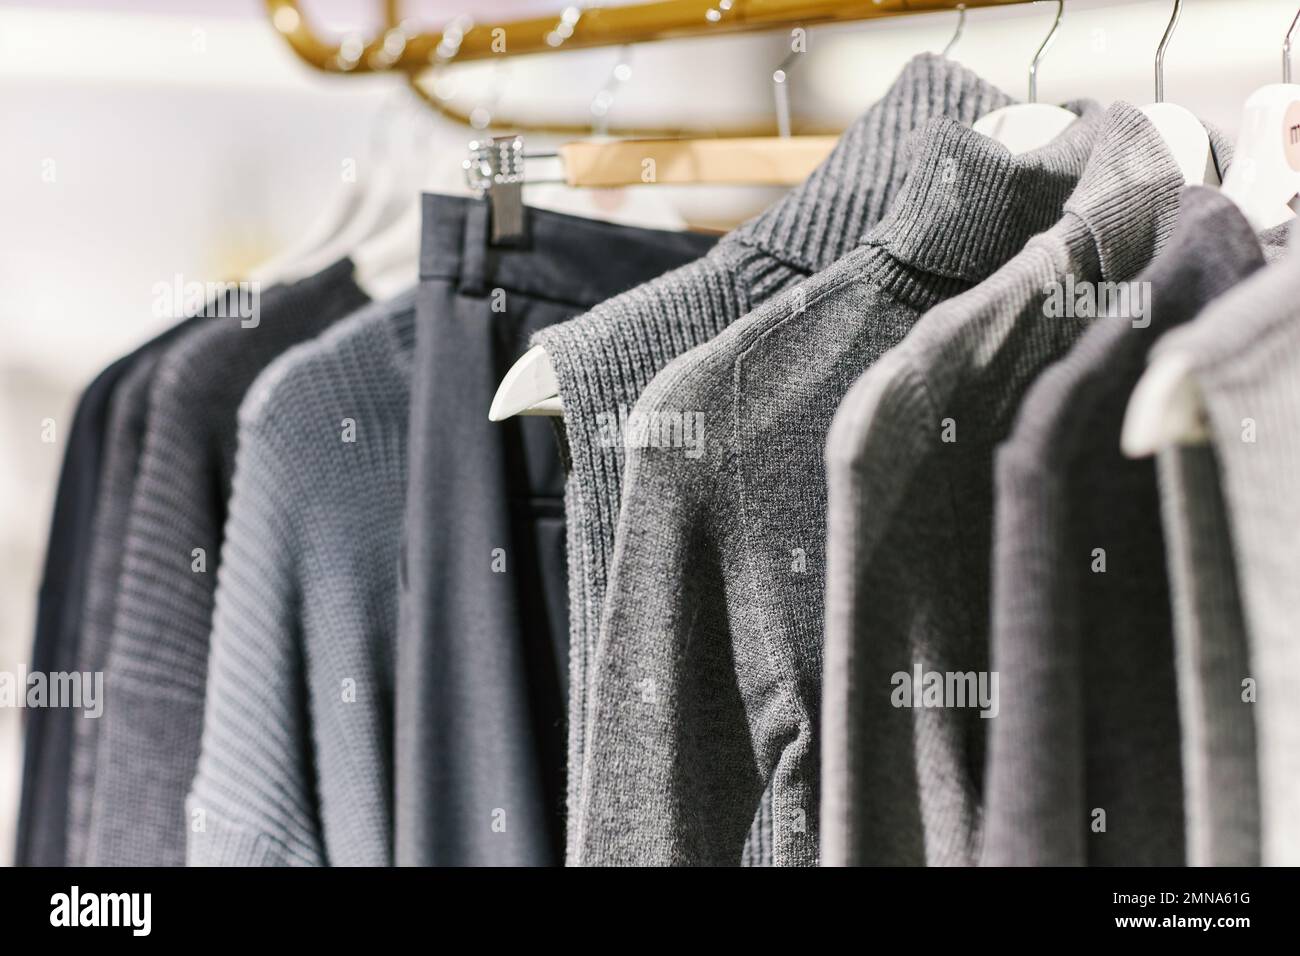 Background image of Autumn knitwear collection in grey tones on rack in clothing boutique, copy space Stock Photo